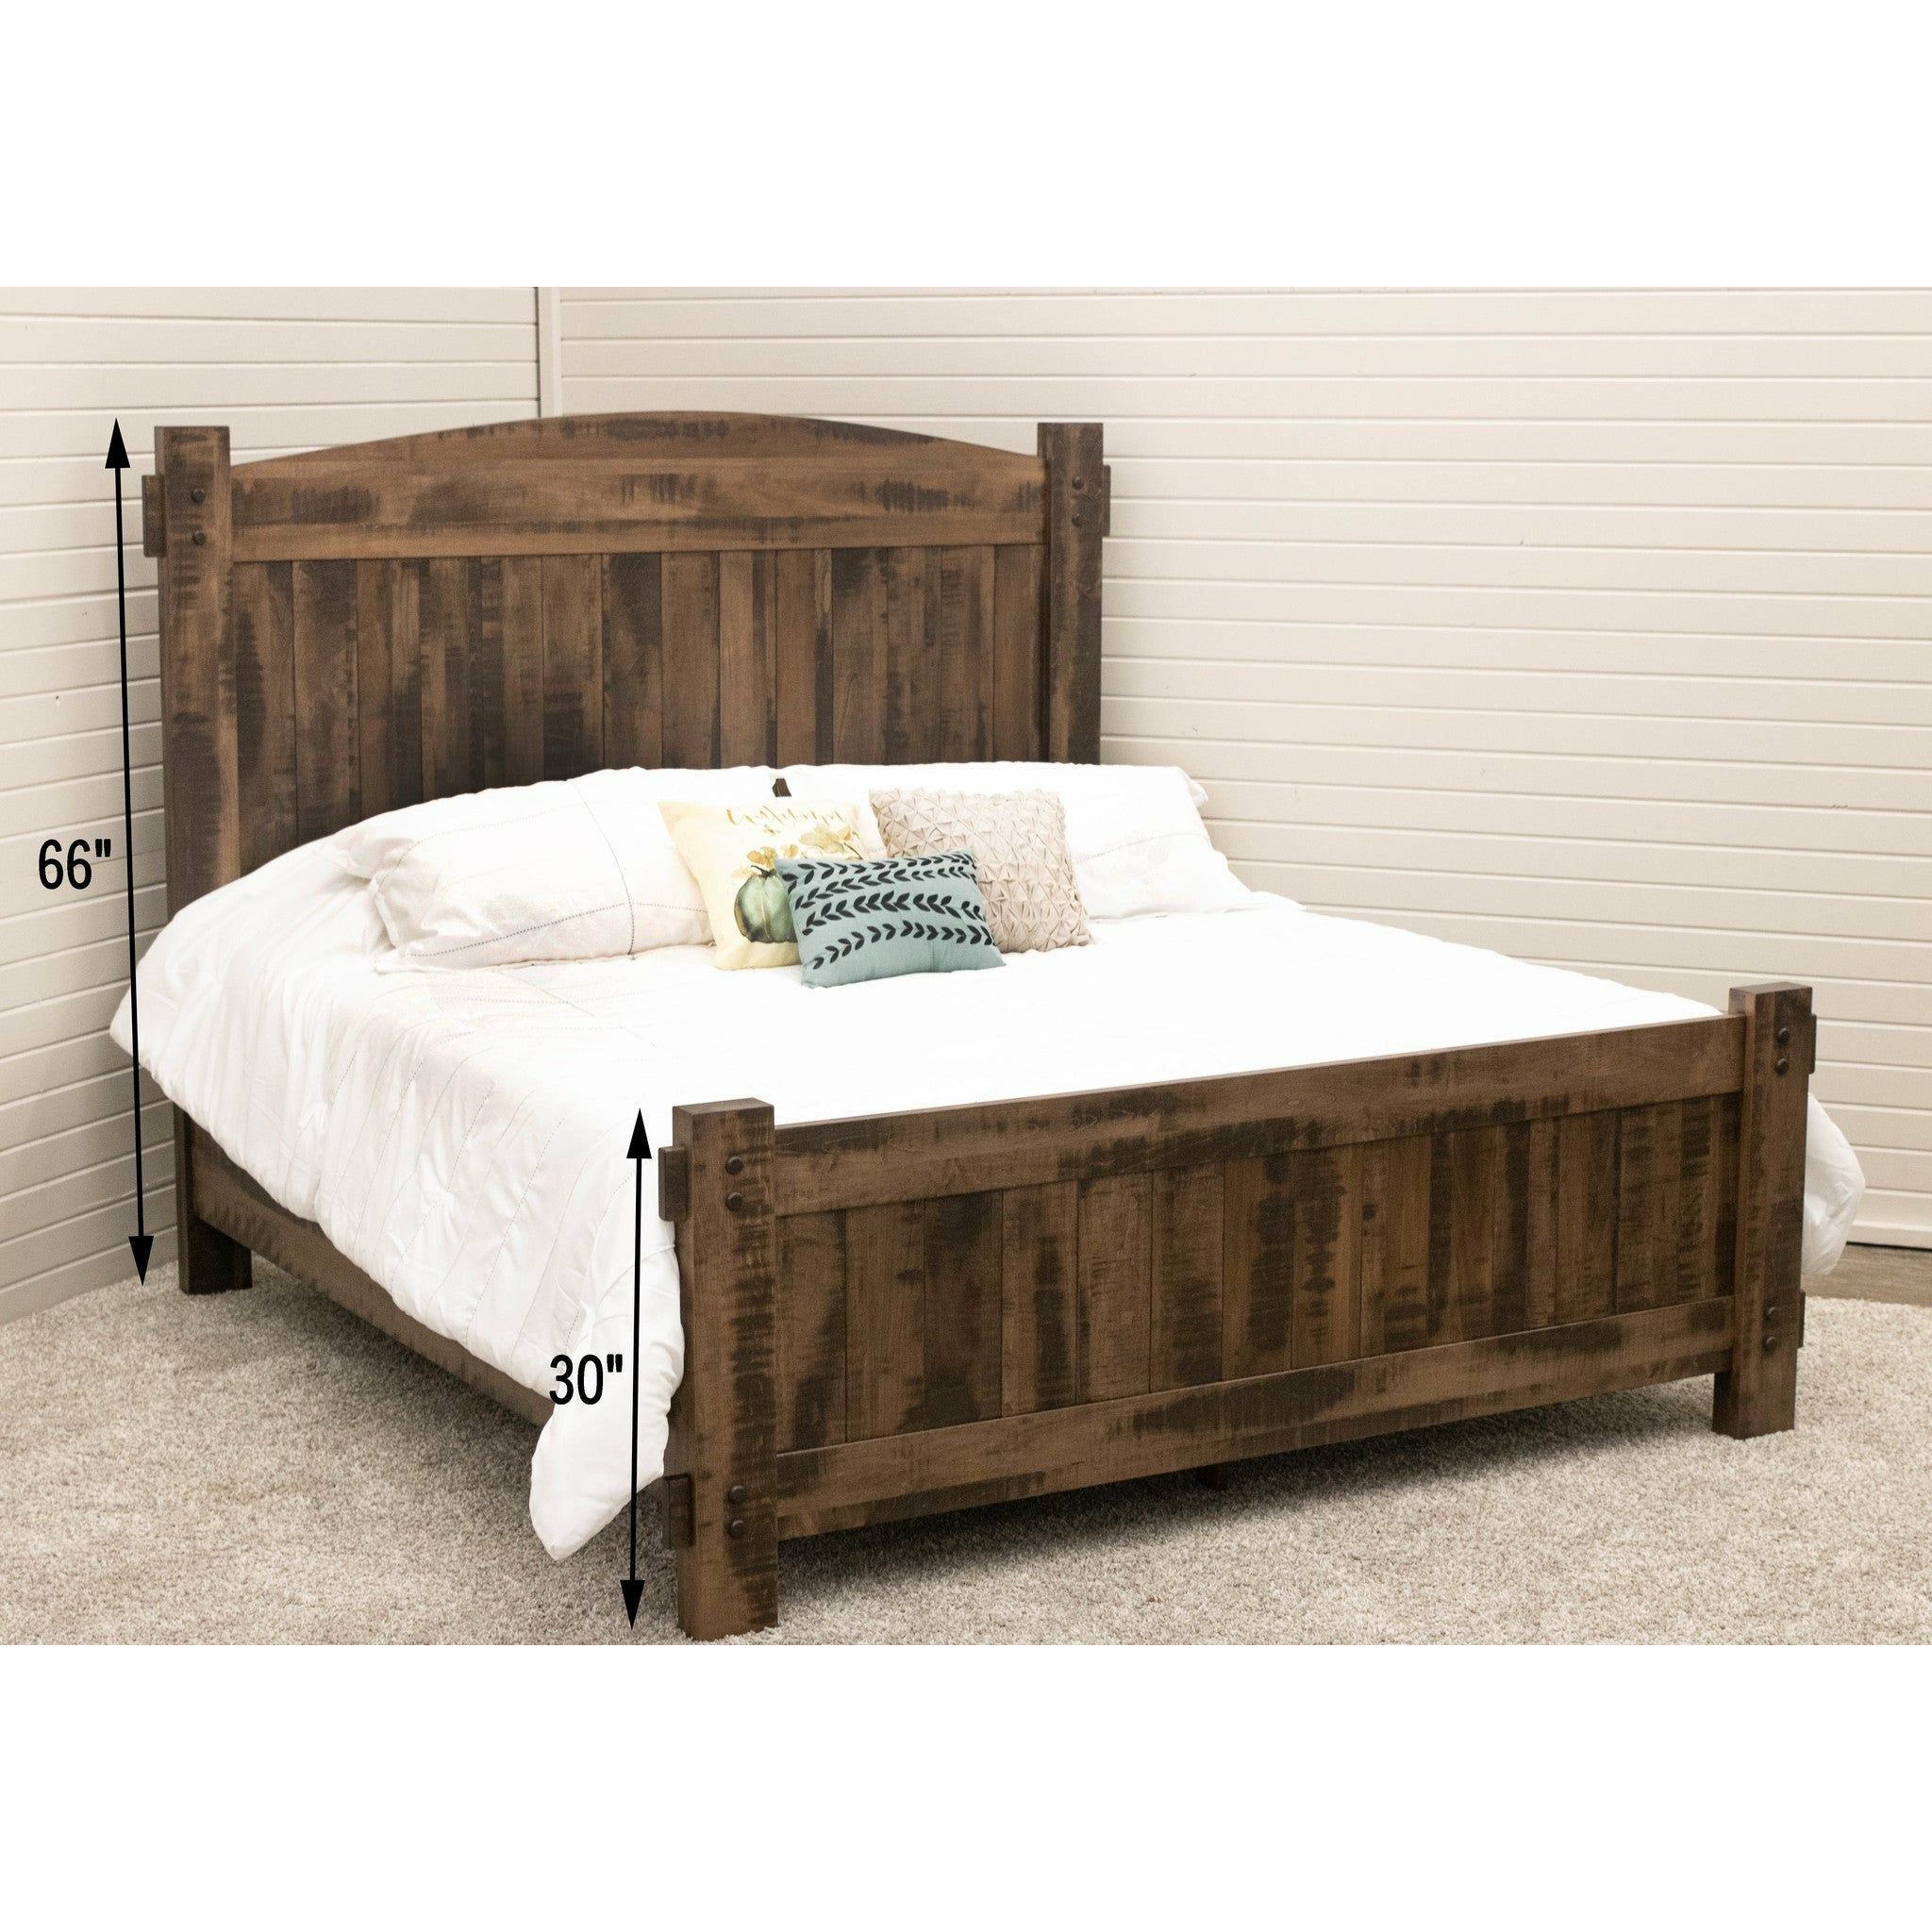 DCF Roughsawn Bed w/ Arched Headboard